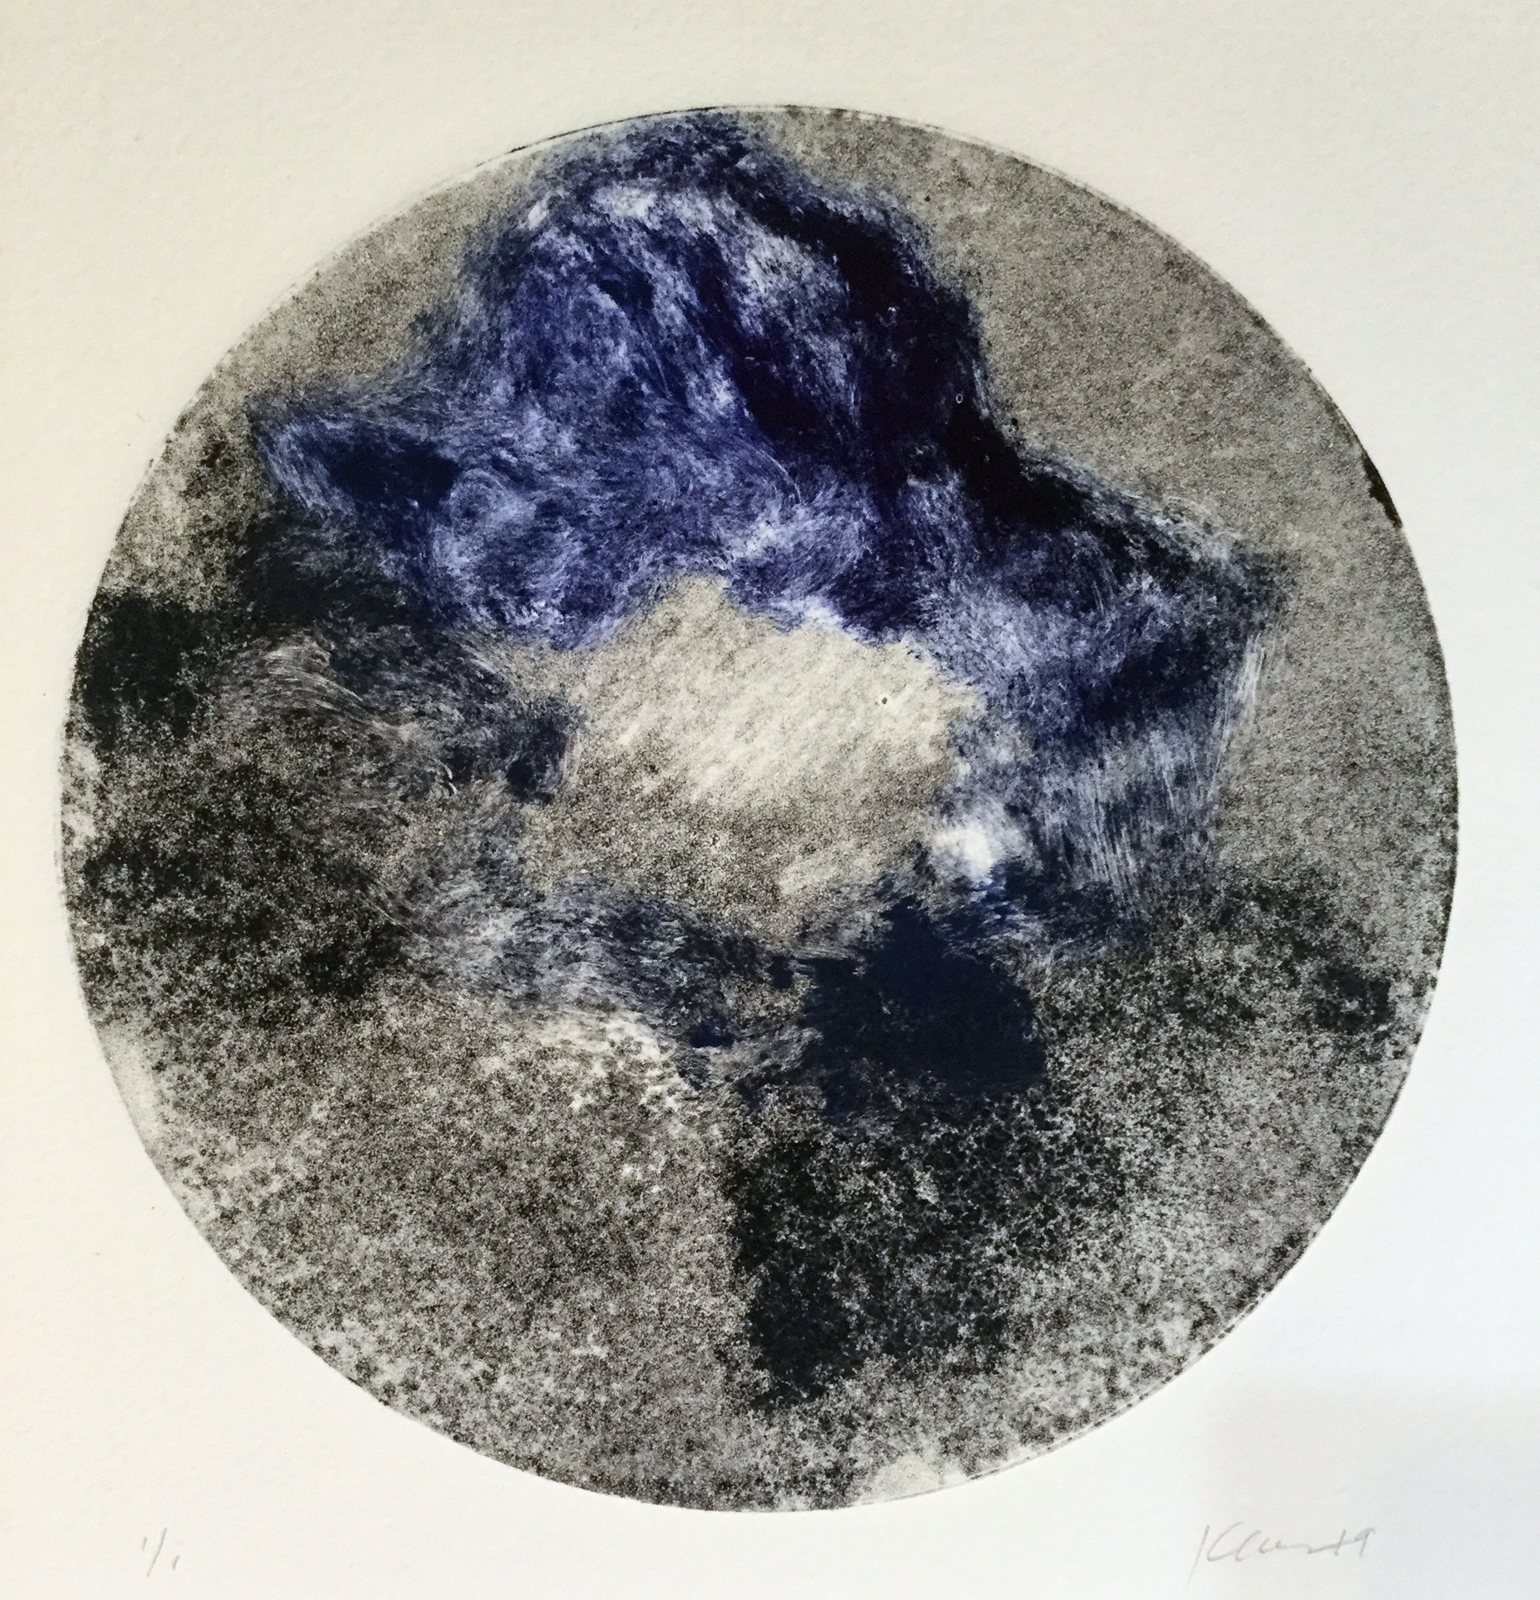  Kathline Carr,  “Blue Storm”   Monotype, 8 x 8 inches (round) 